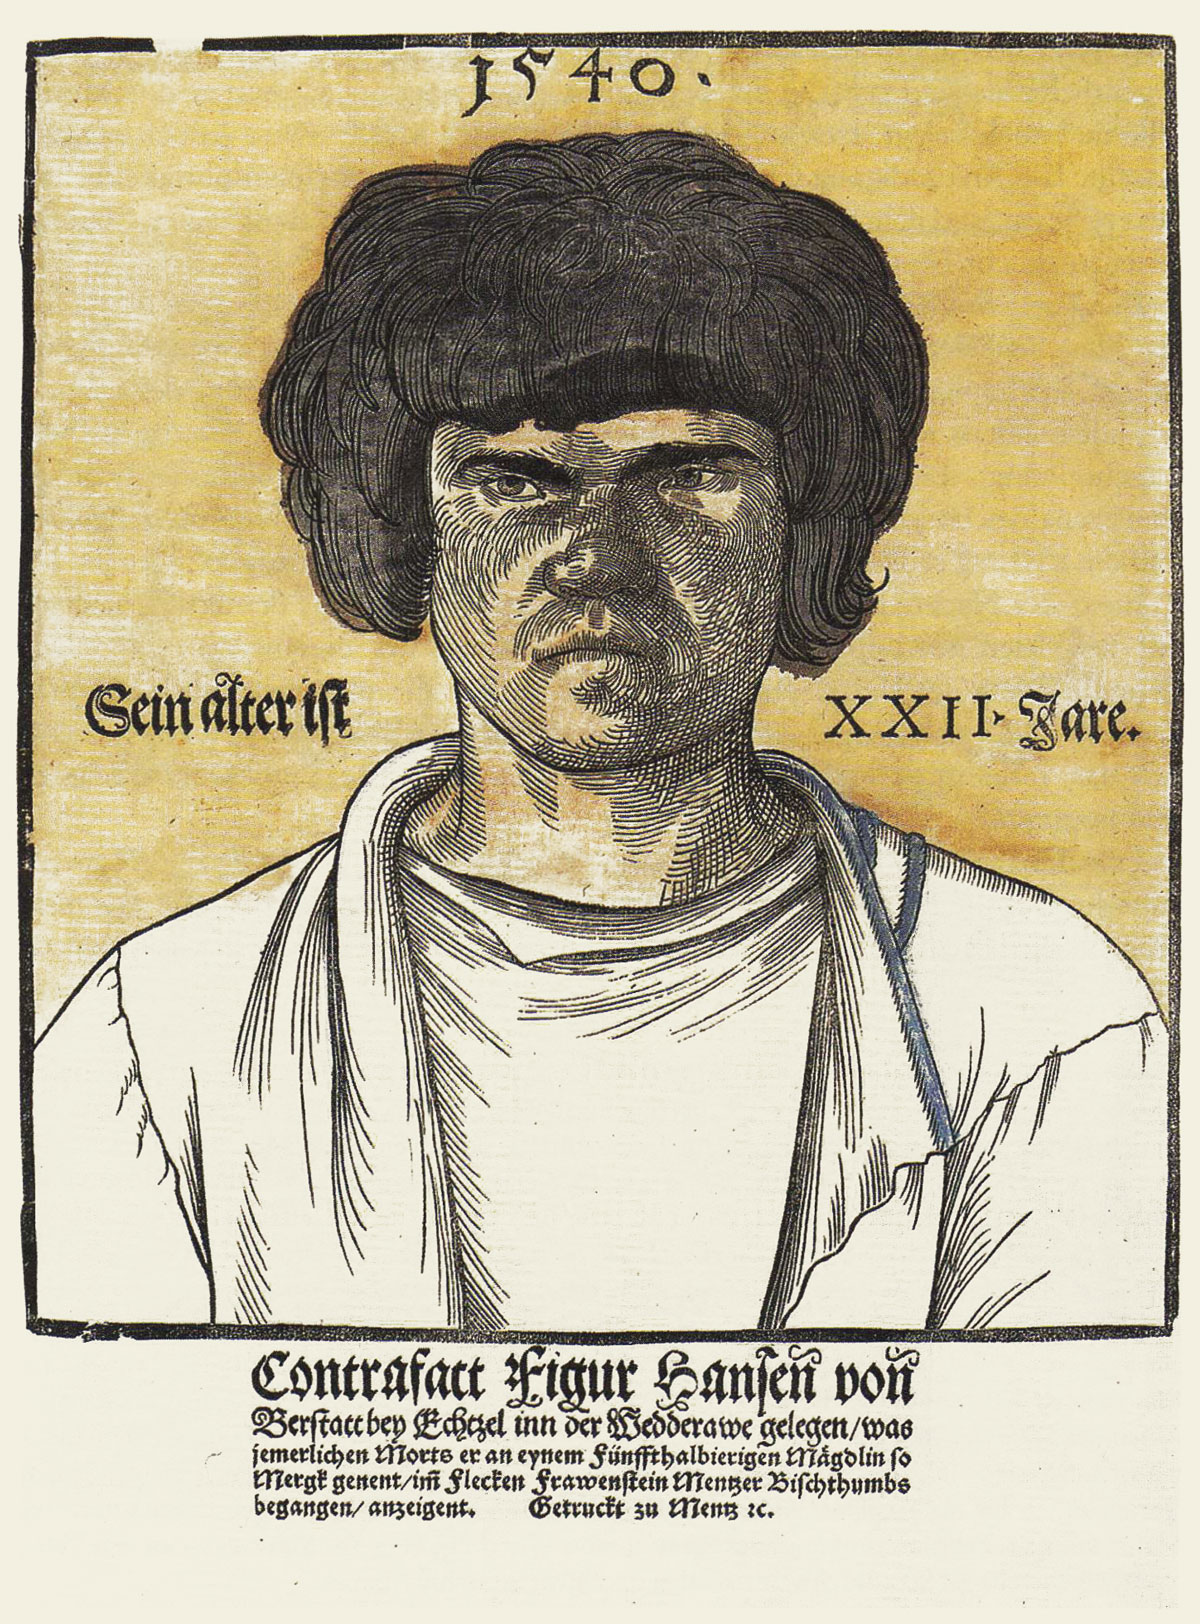 A mid-sixteenth-century woodcut portrait of the child murderer Hans von Berstatt suggests the form of later “Wanted” posters.